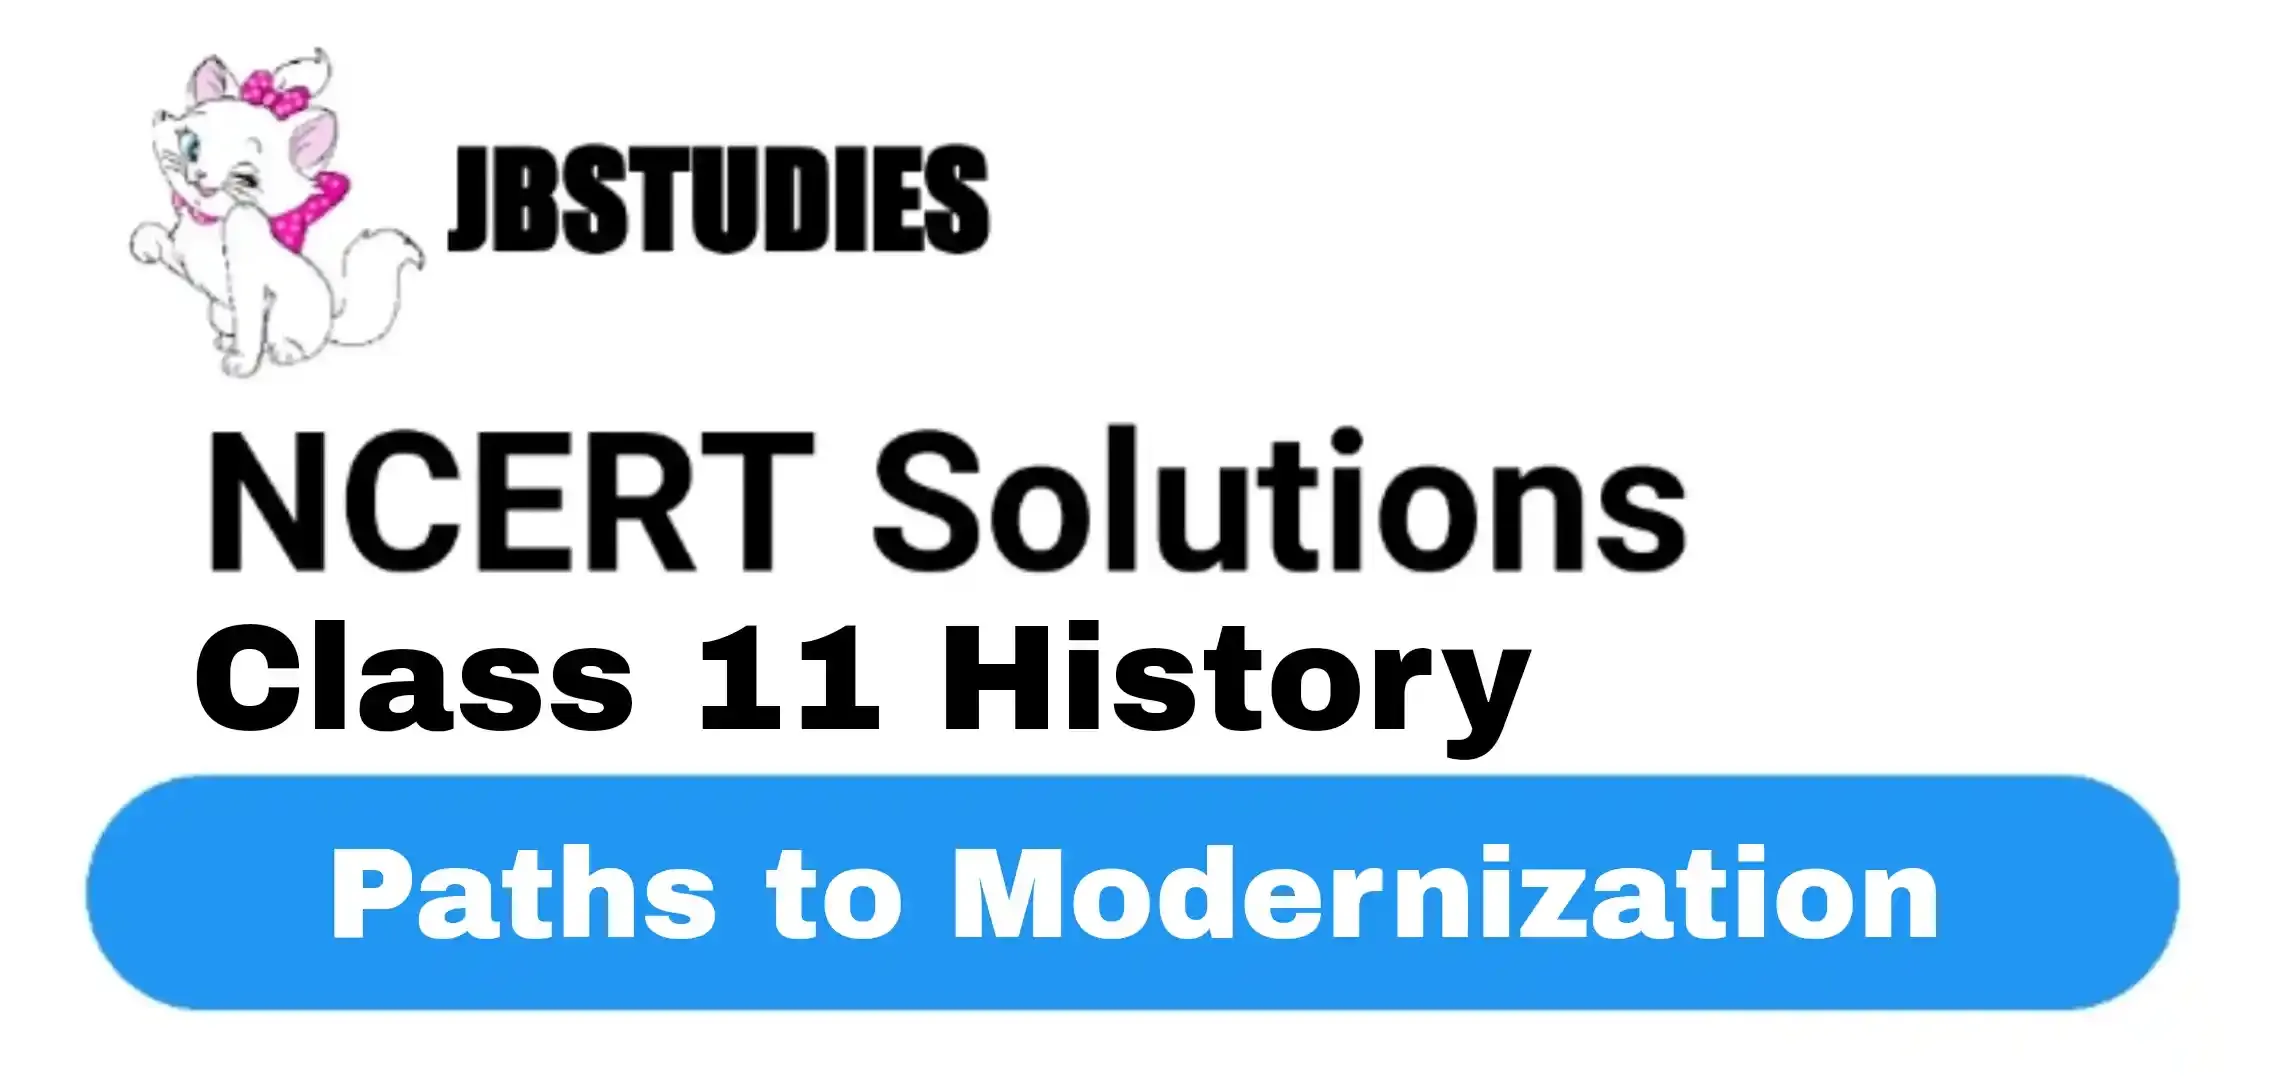 Solutions Class 11 History Chapter-11 Paths to Modernization